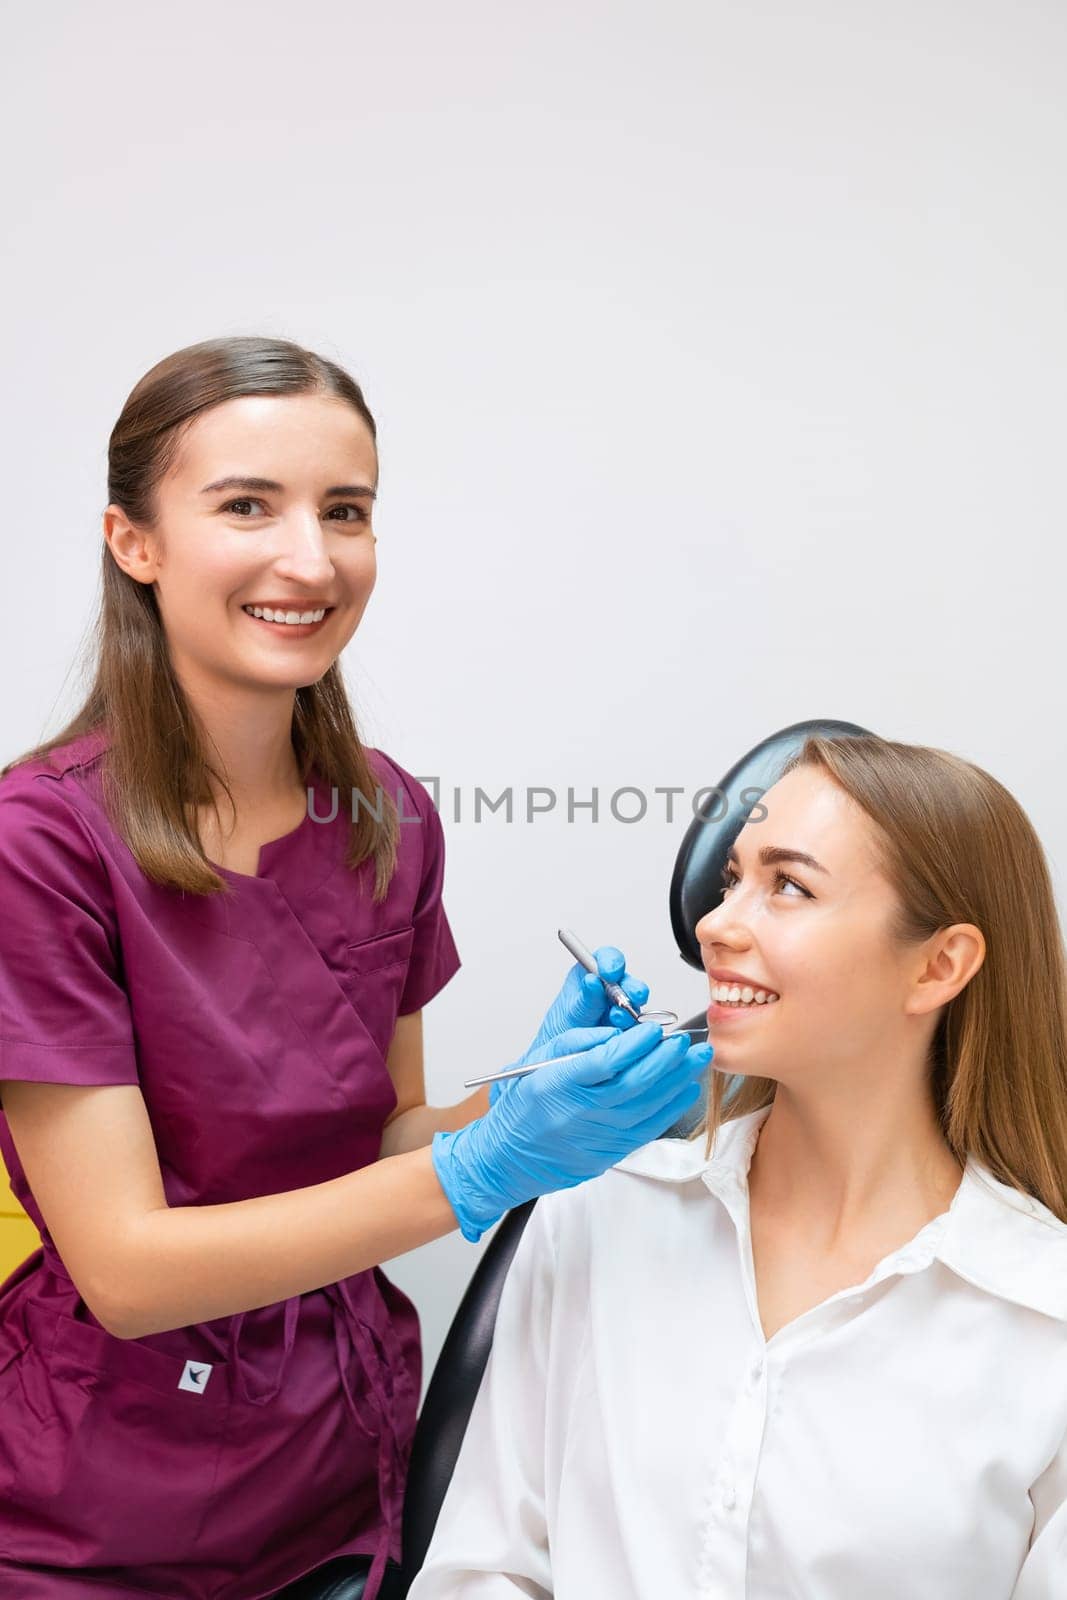 Happy young female dentist making treatment of teeth for blonde lady patient.